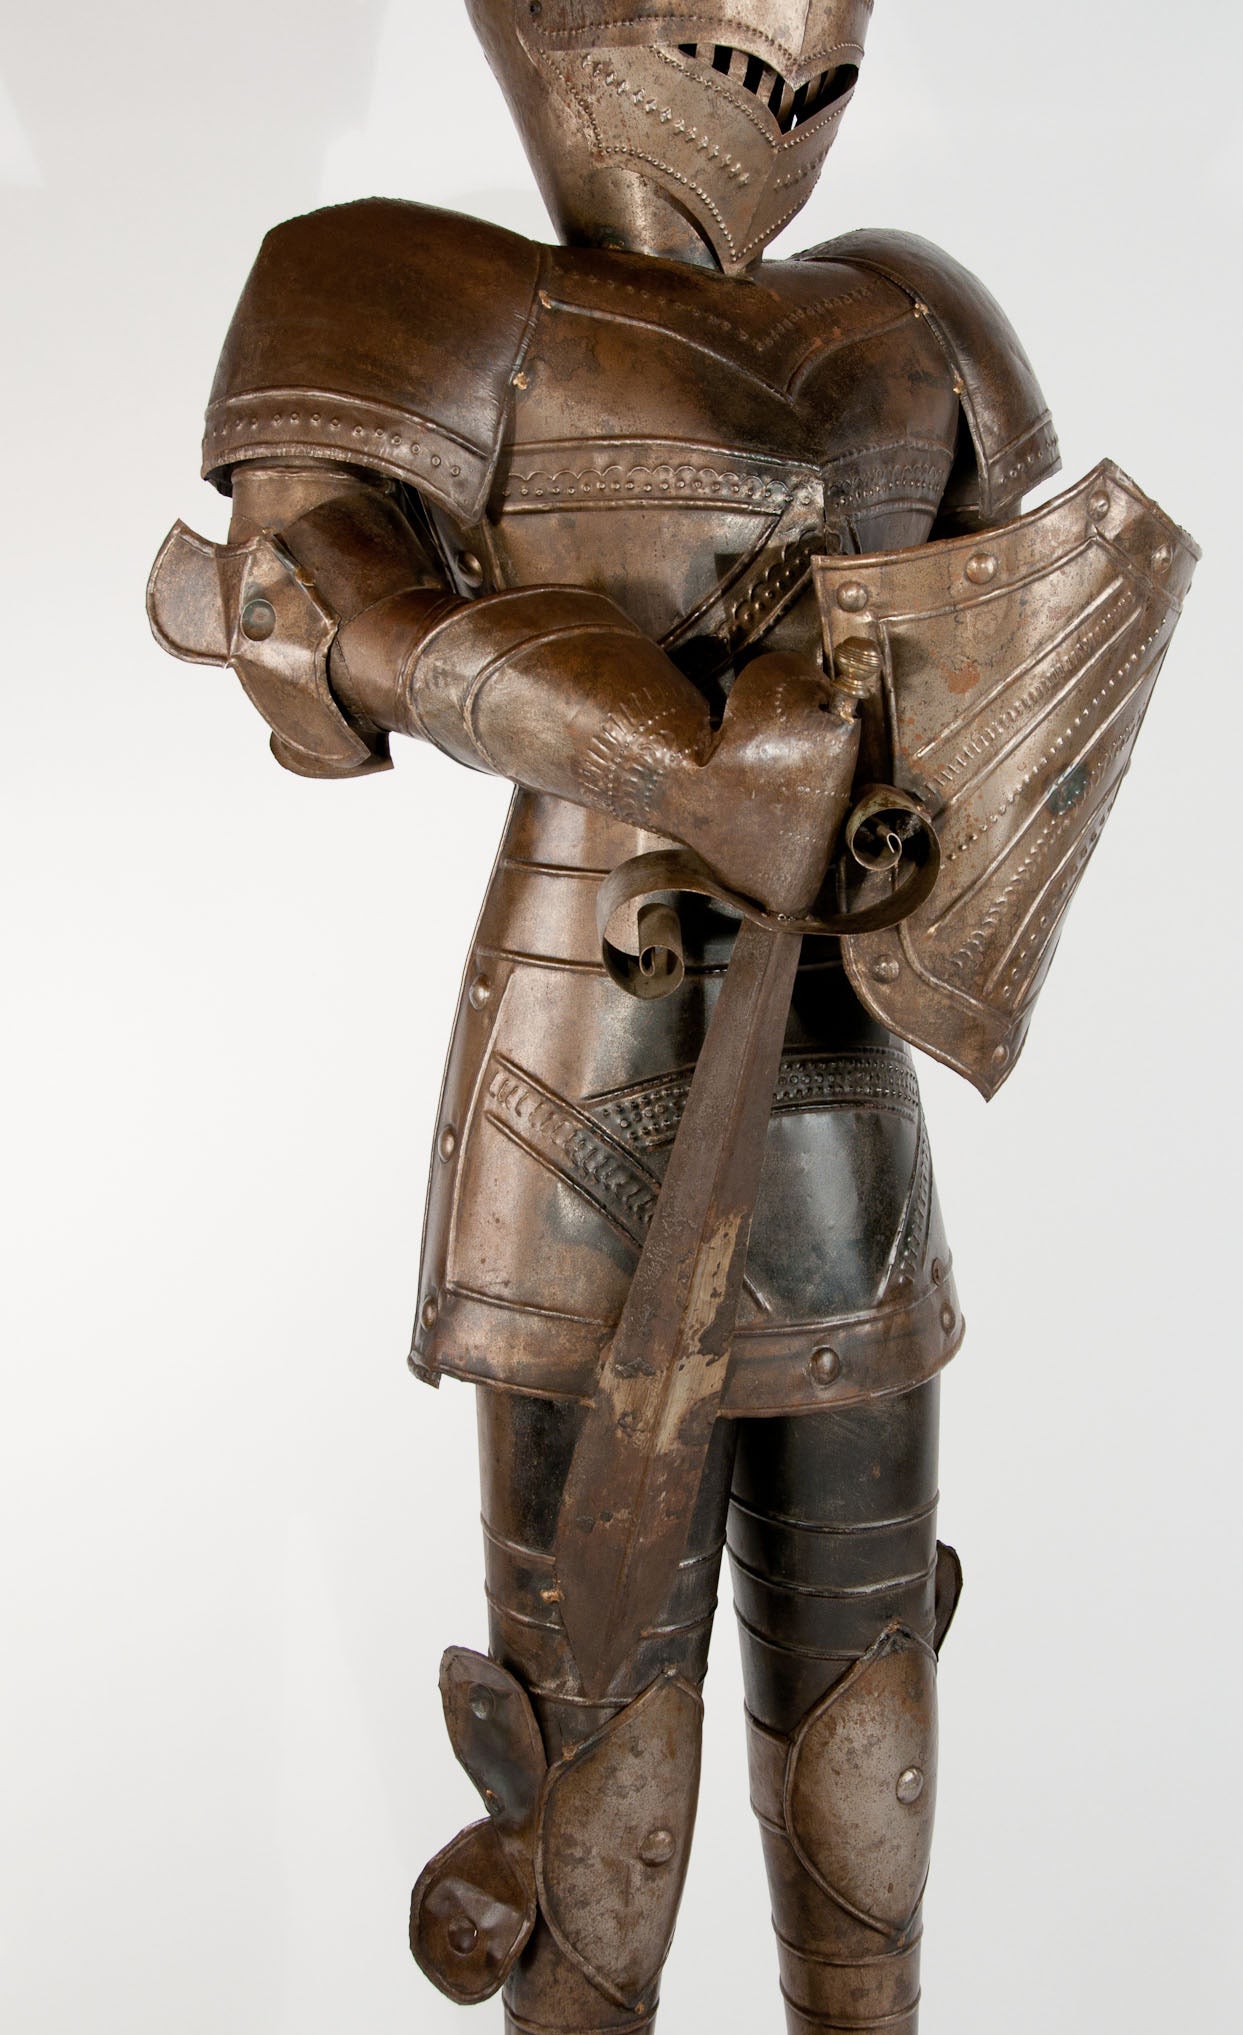 A Delightful and slightly larger than life! tin statue of a knight in armour. Standing at a impressive 7 foot 2 inches in total this antique suit of armour constructed from tin has been made to the highest quality. An impressive item to make the